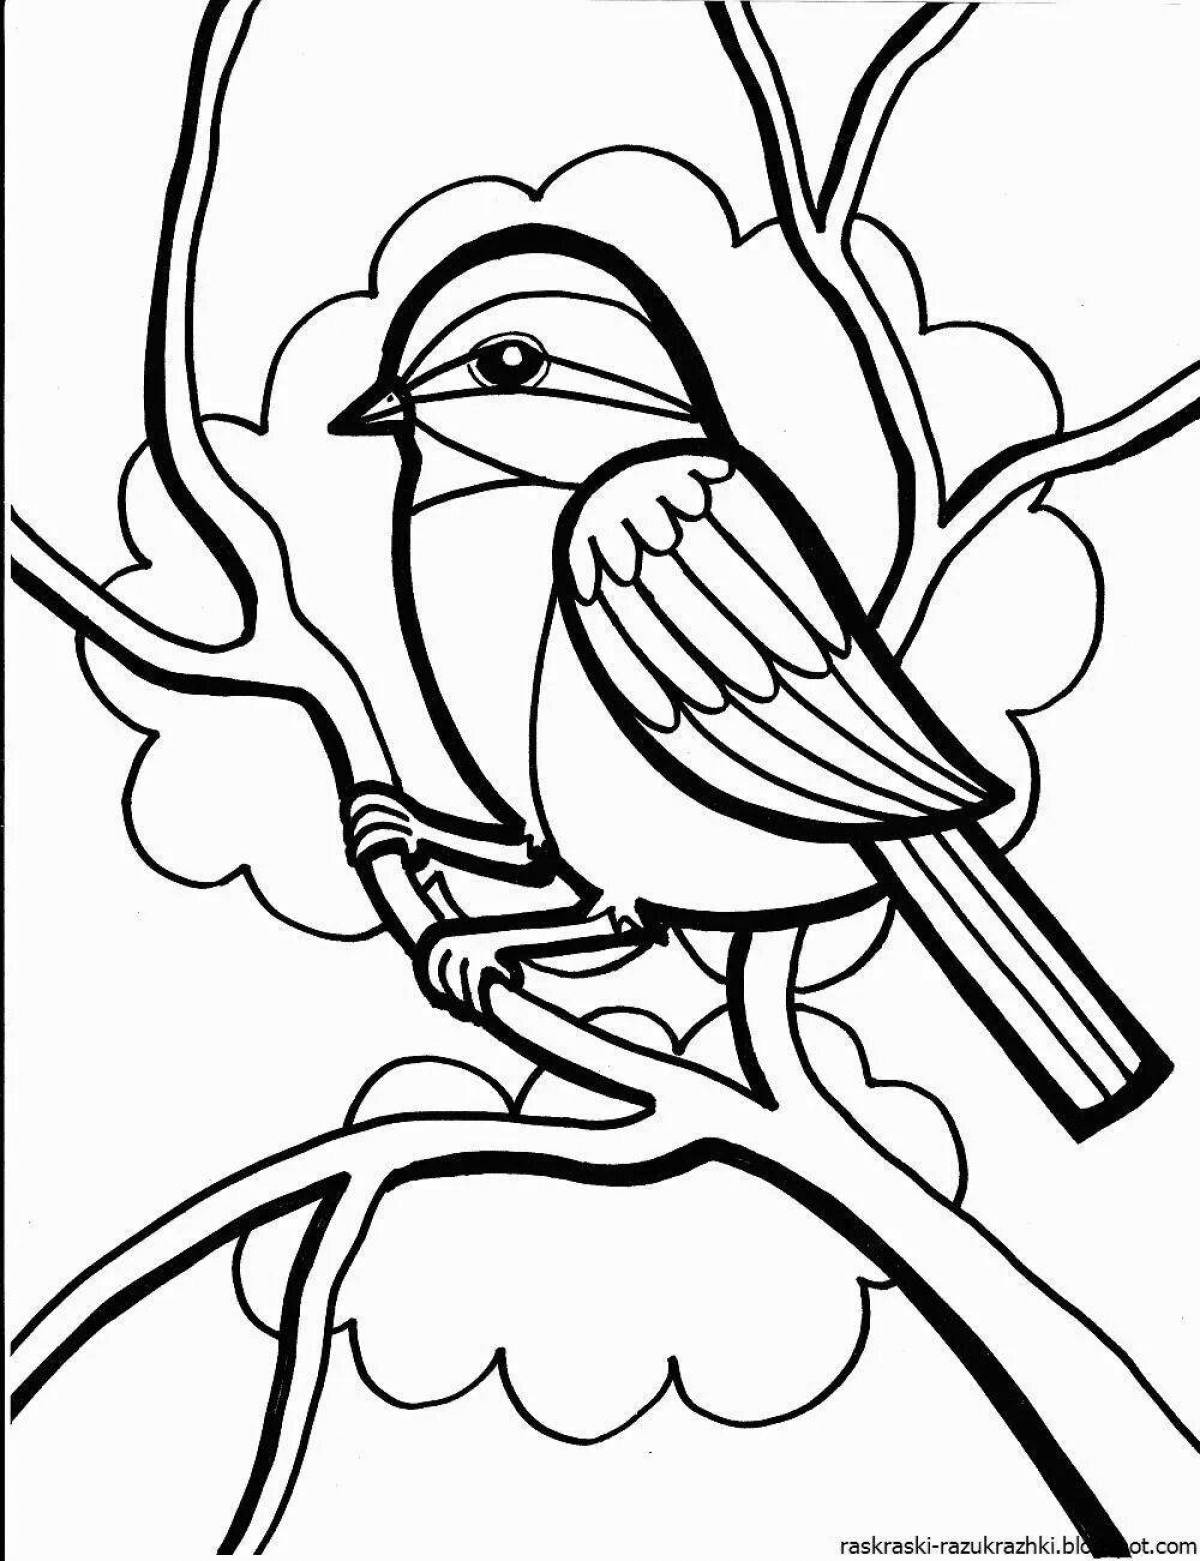 Coloring book nice bullfinch for children 6-7 years old